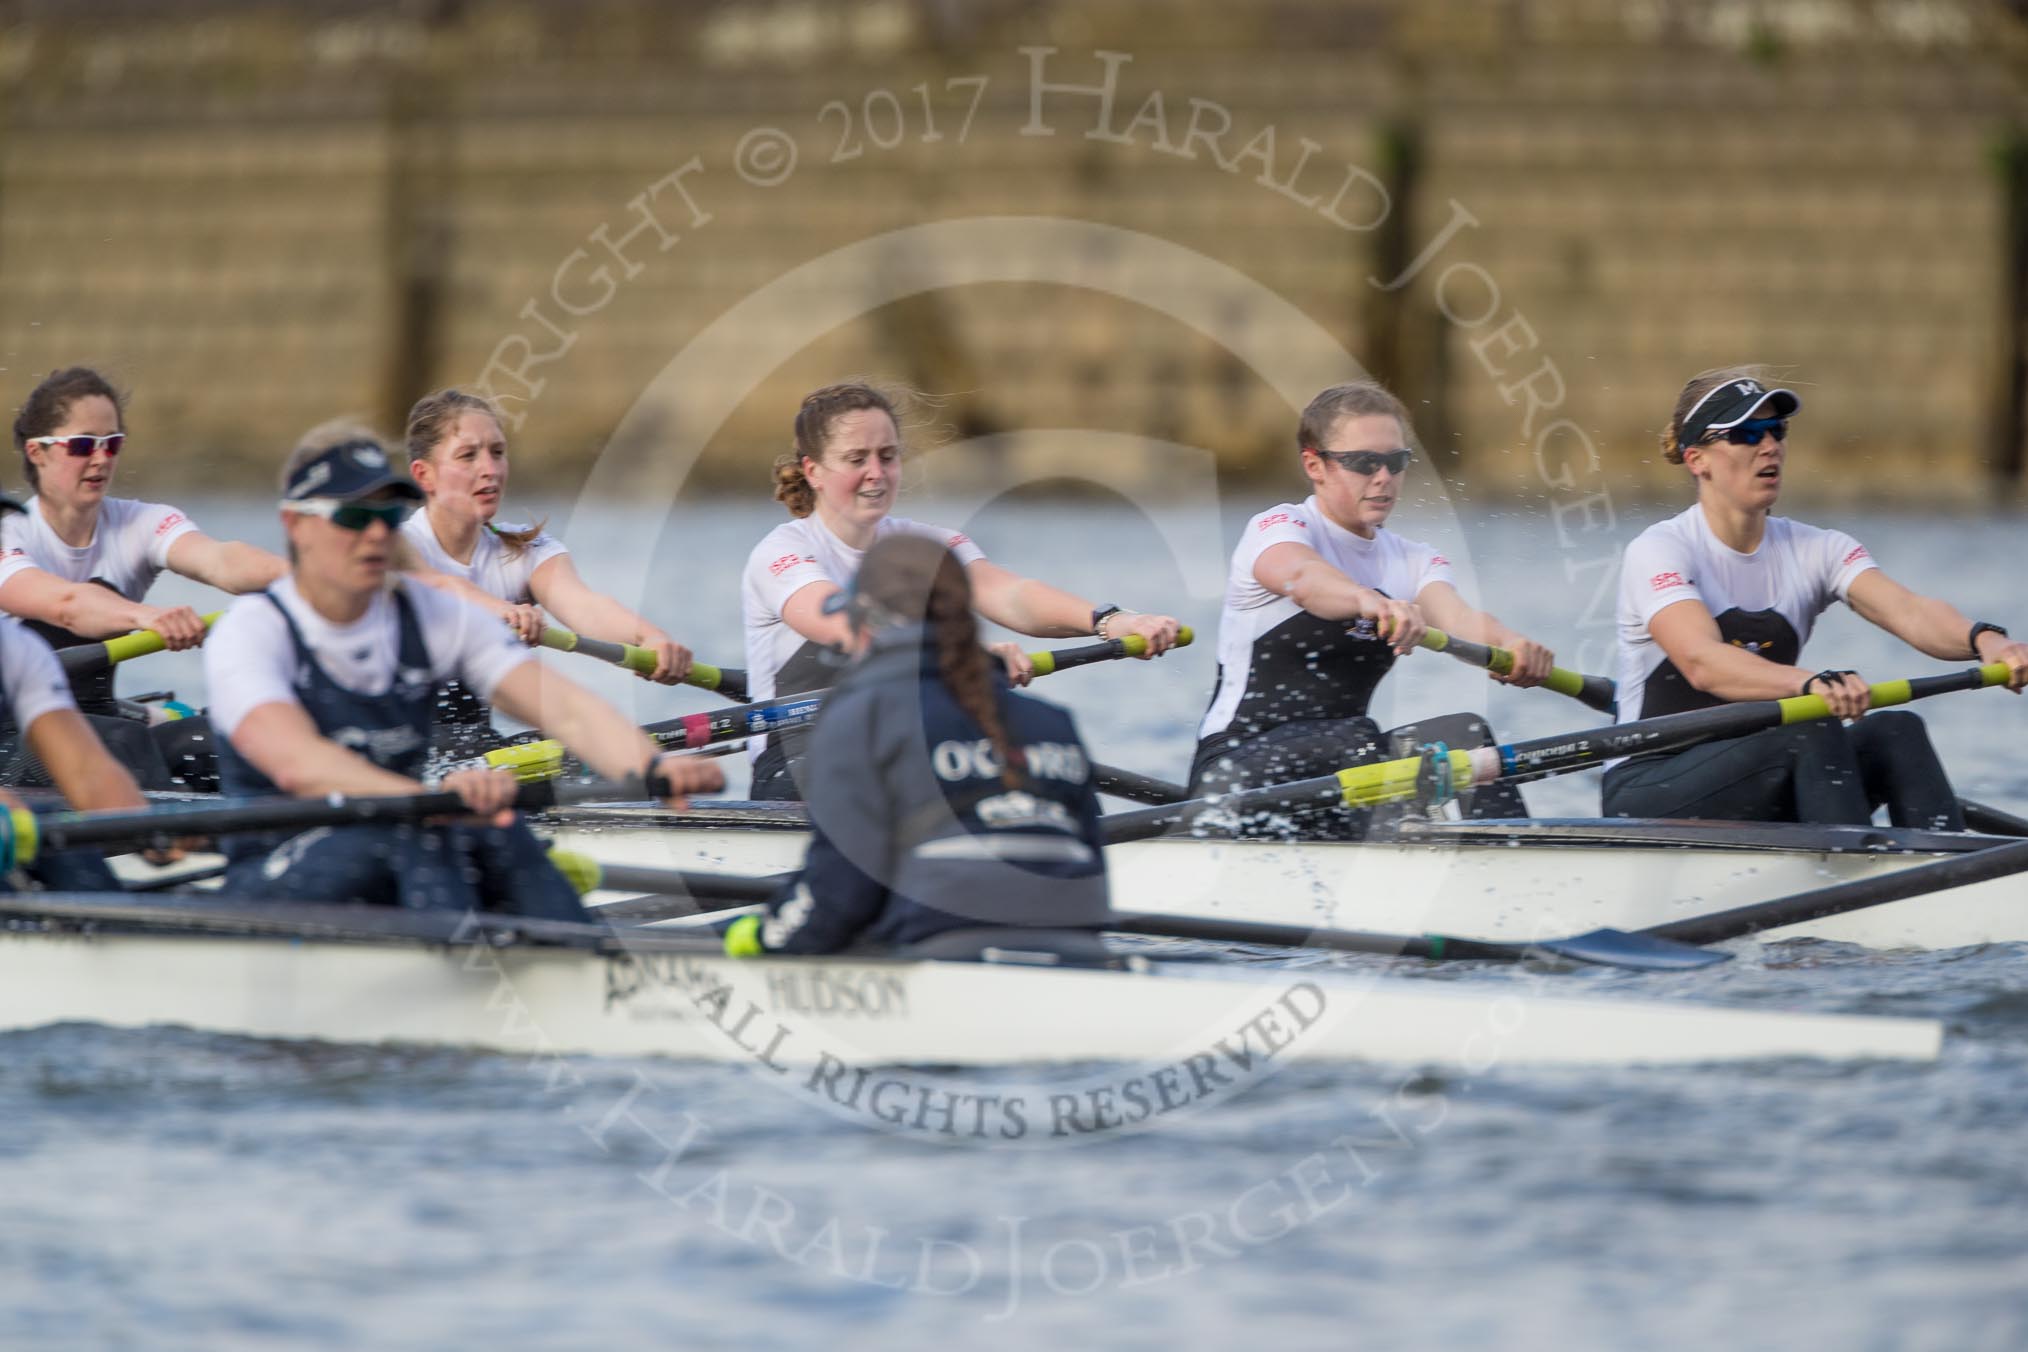 The Cancer Research UK Boat Race season 2017 - Women's Boat Race Fixture OUWBC vs Molesey BC: OUWBC with a lead of around half a length in the milepost area.
River Thames between Putney Bridge and Mortlake,
London SW15,

United Kingdom,
on 19 March 2017 at 16:03, image #67